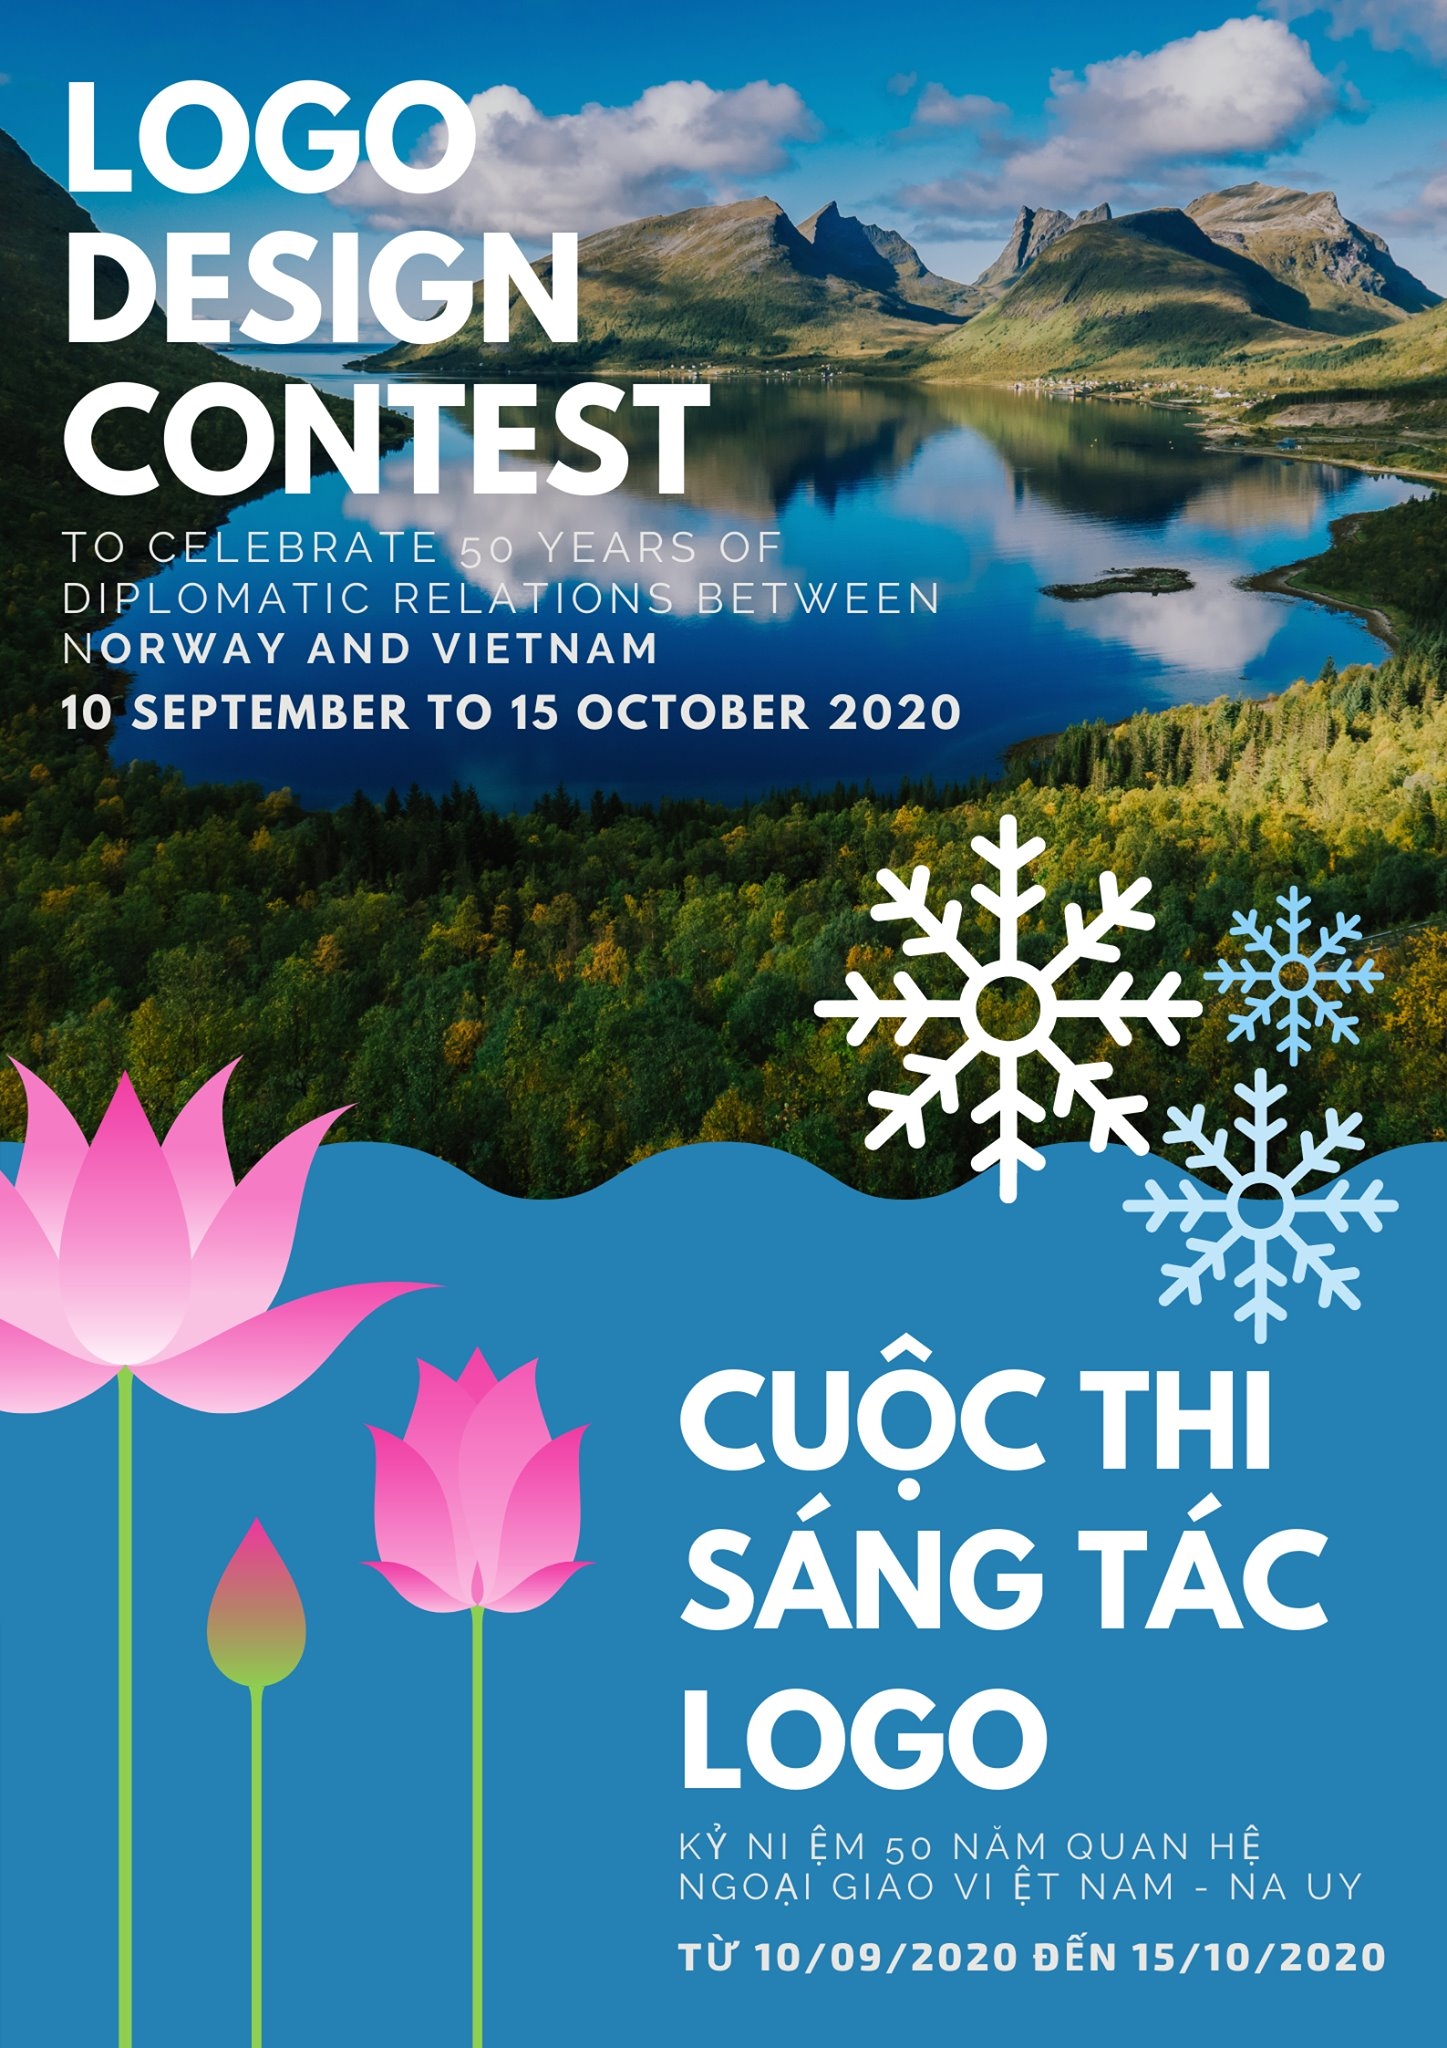 Logo design contest marking Vietnam-Norway 50 years of diplomatic ties launched